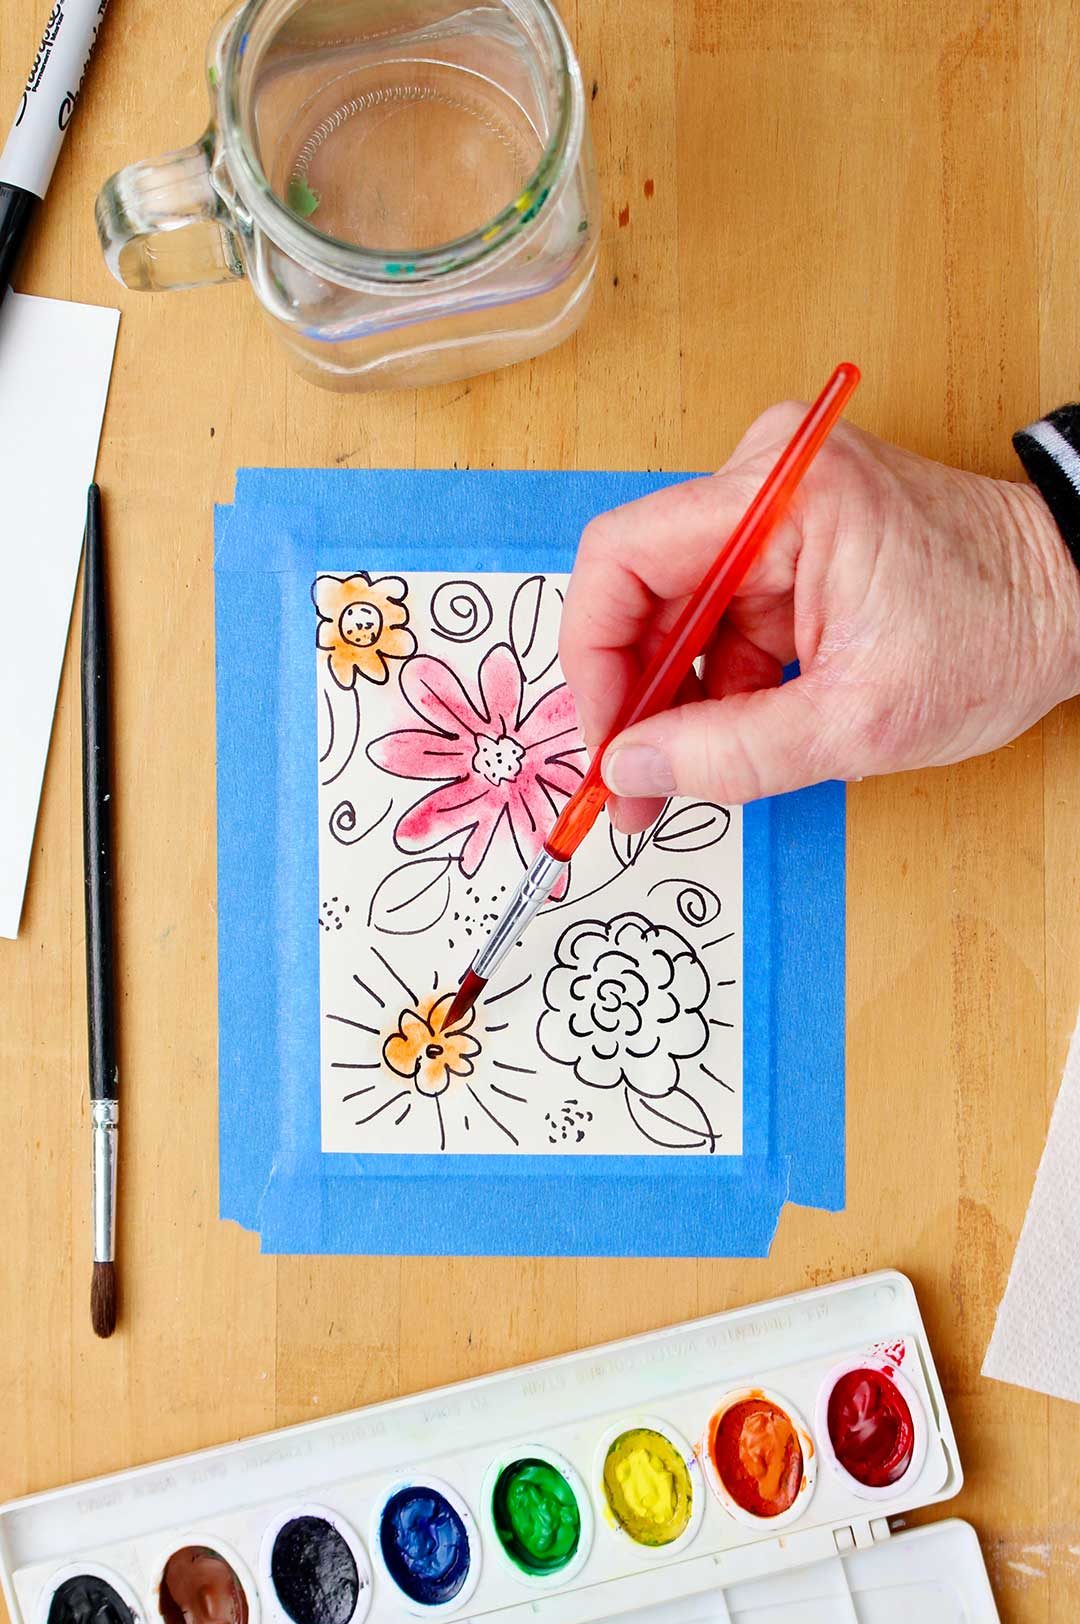 Hand painting marker outlined flowers orange with watercolors with supplies near by on table.